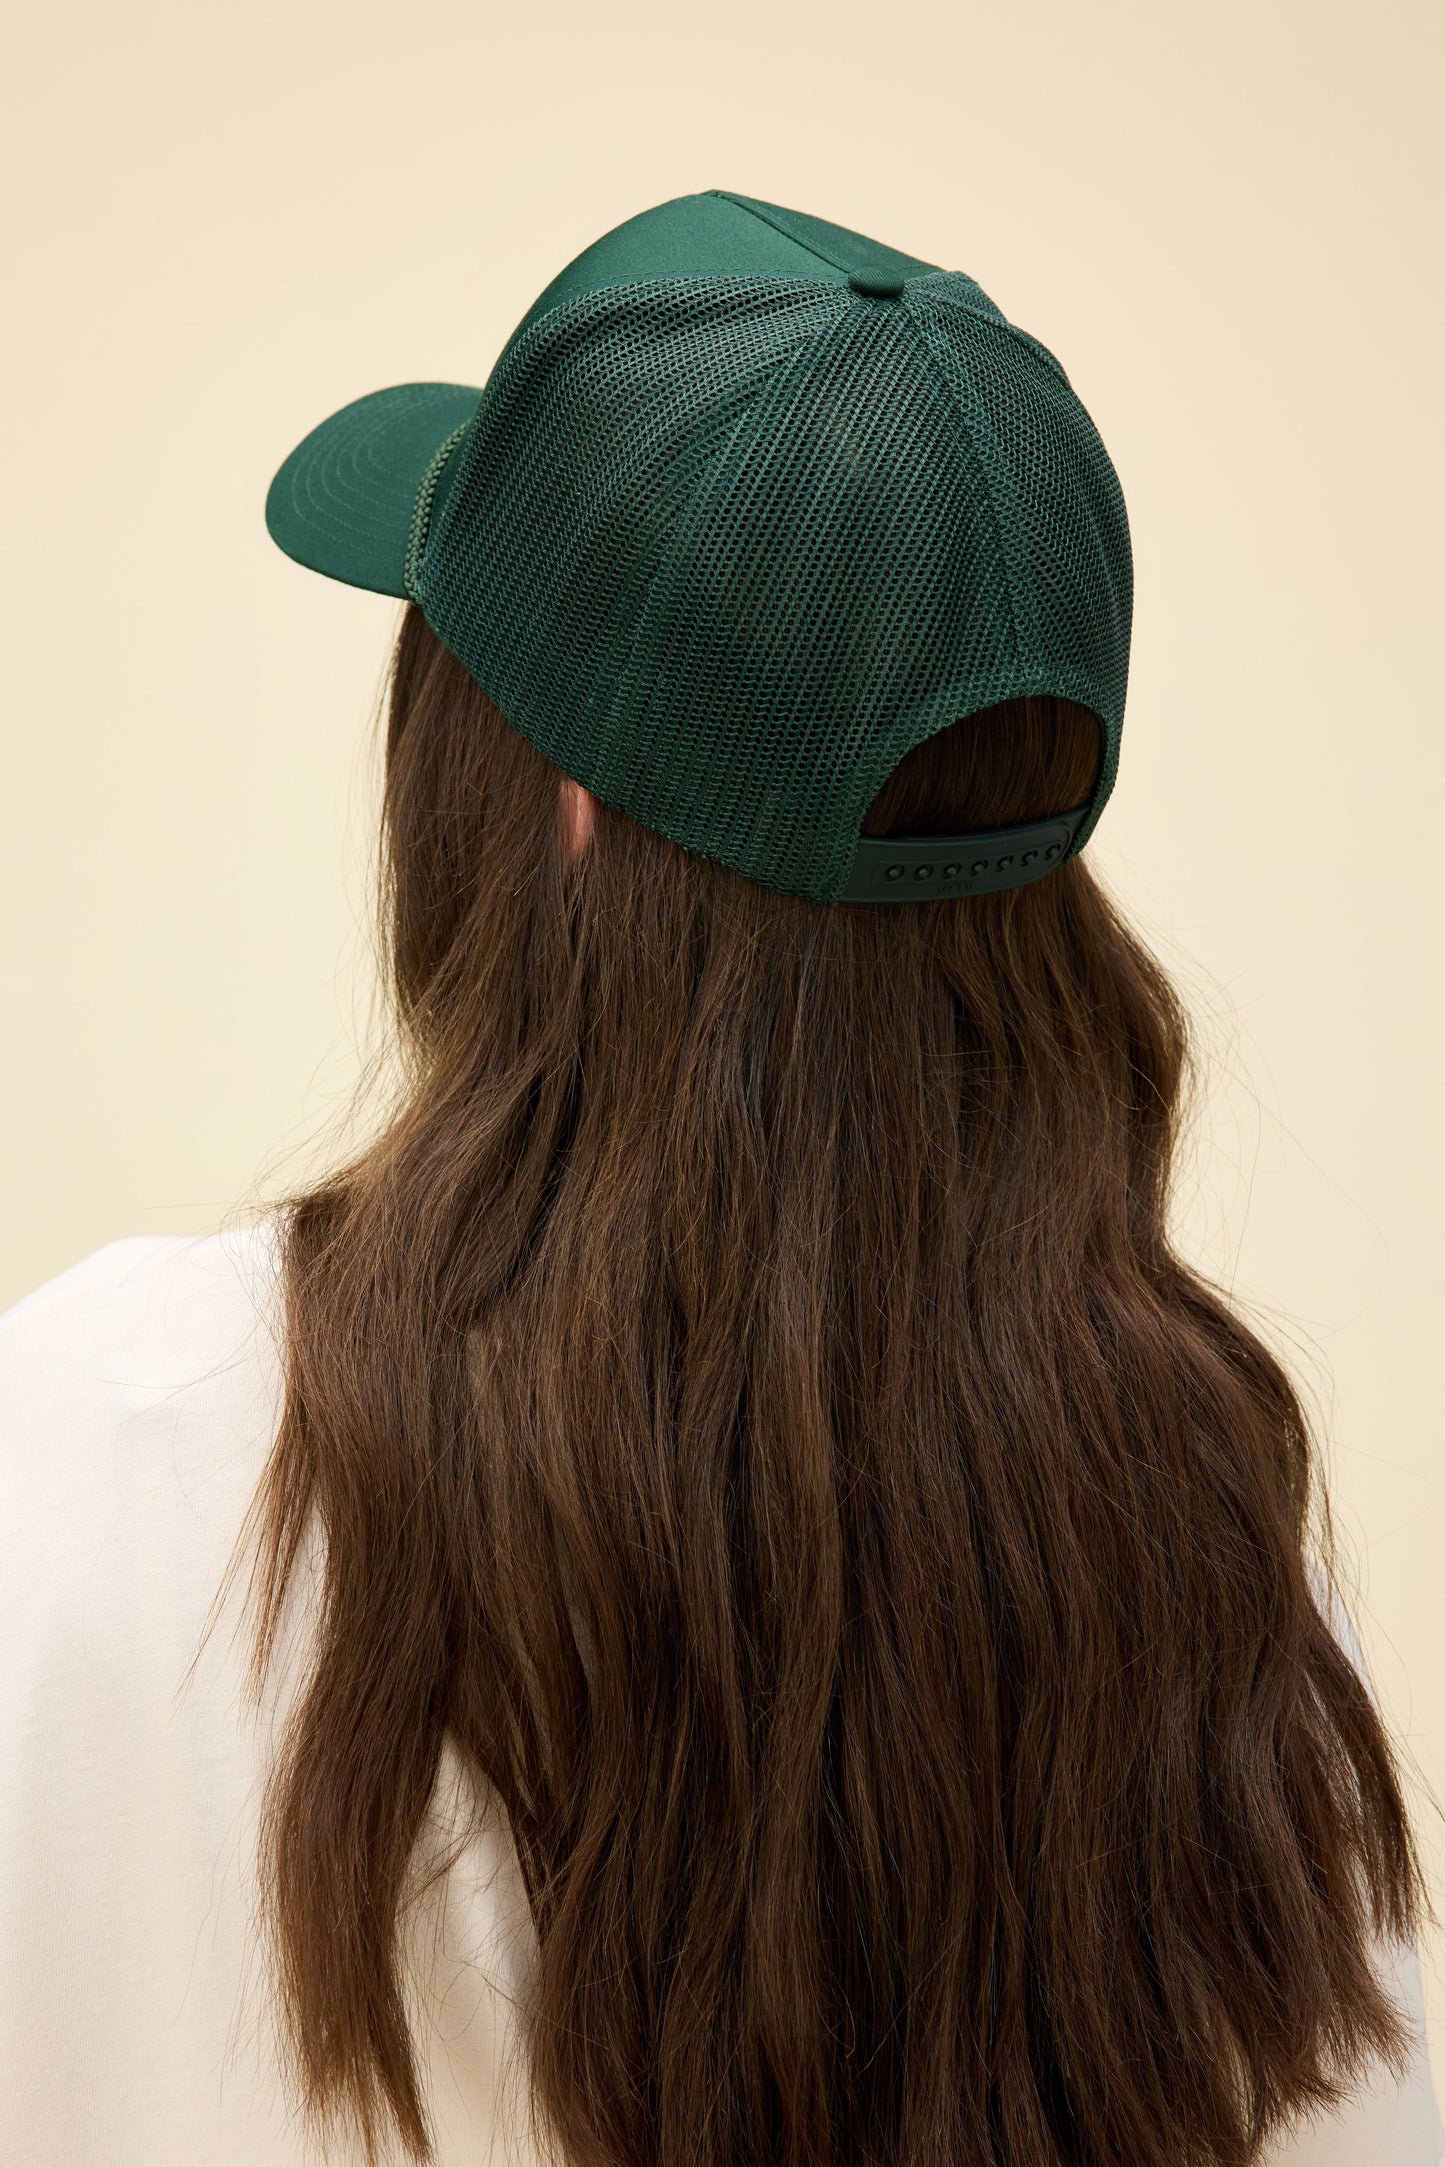 Model wearing a dark green trucker hat with western-style 'Daydreamer Studios' embroidery on the front.